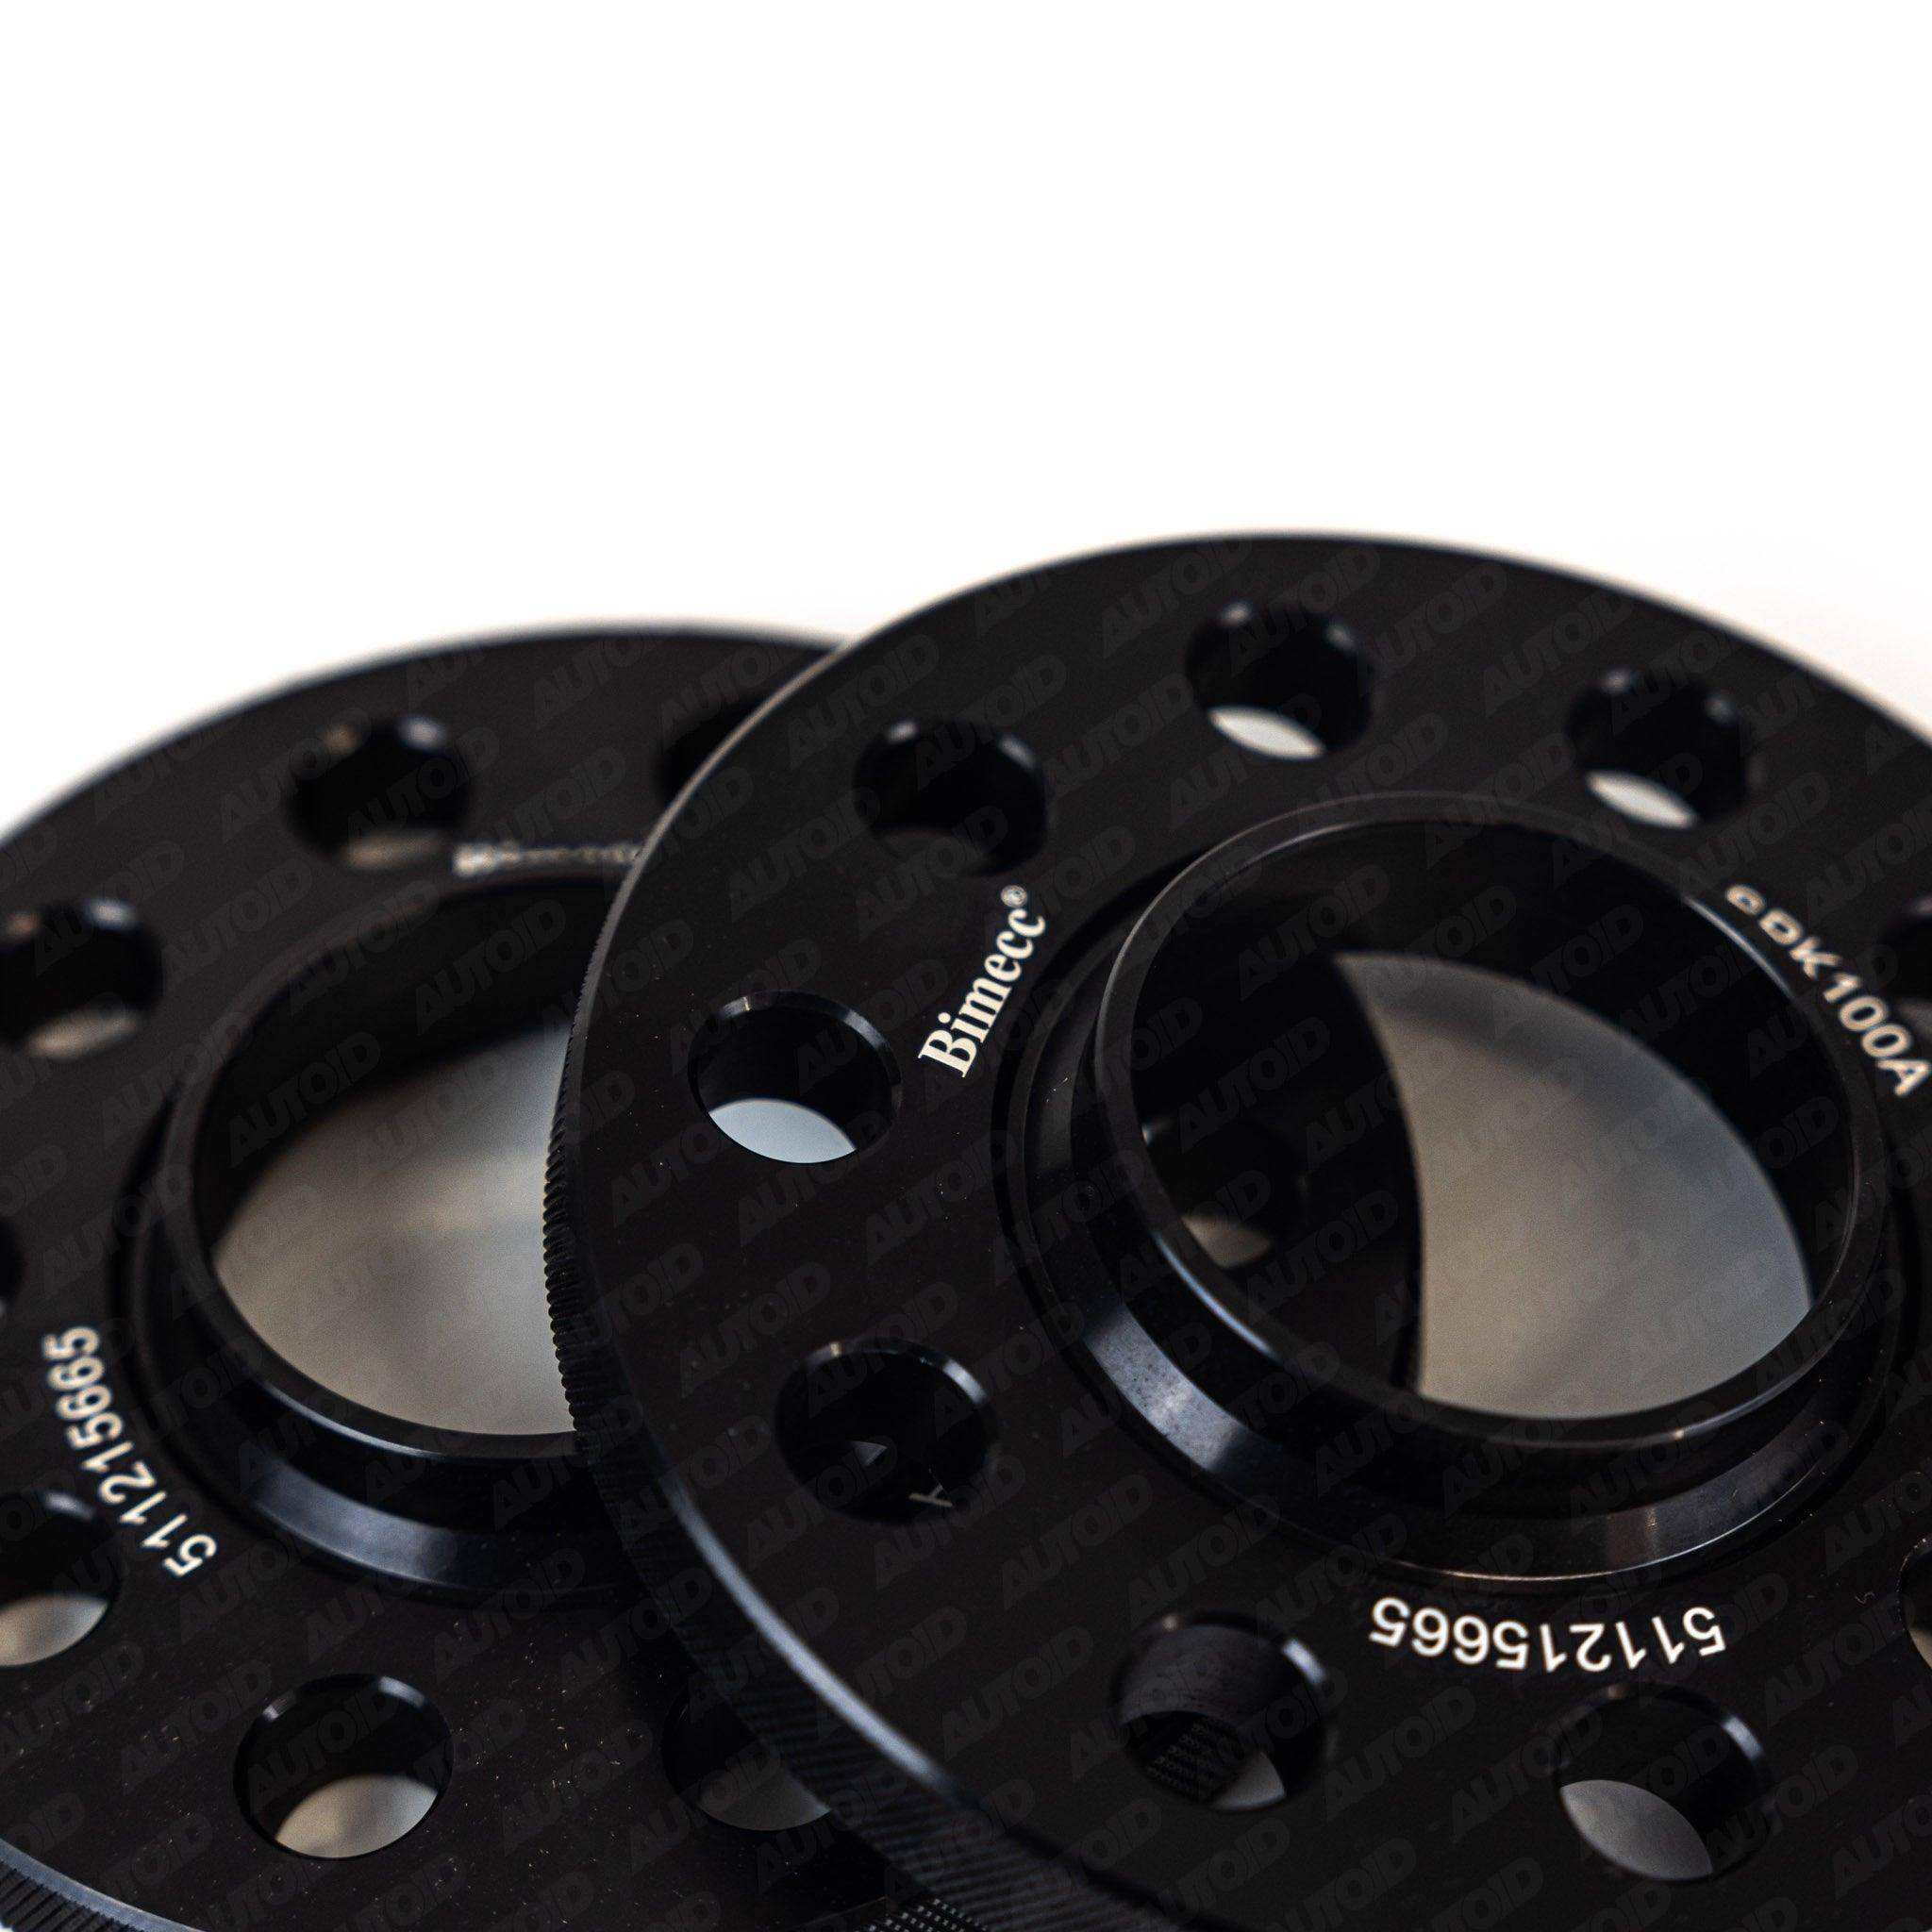 Toyota Supra A90 Mk5 Wheel Spacers Kit 5x112 by Bimecc (2019+, J29), Wheel Spacers, Bimecc - AUTOID | Premium Automotive Accessories